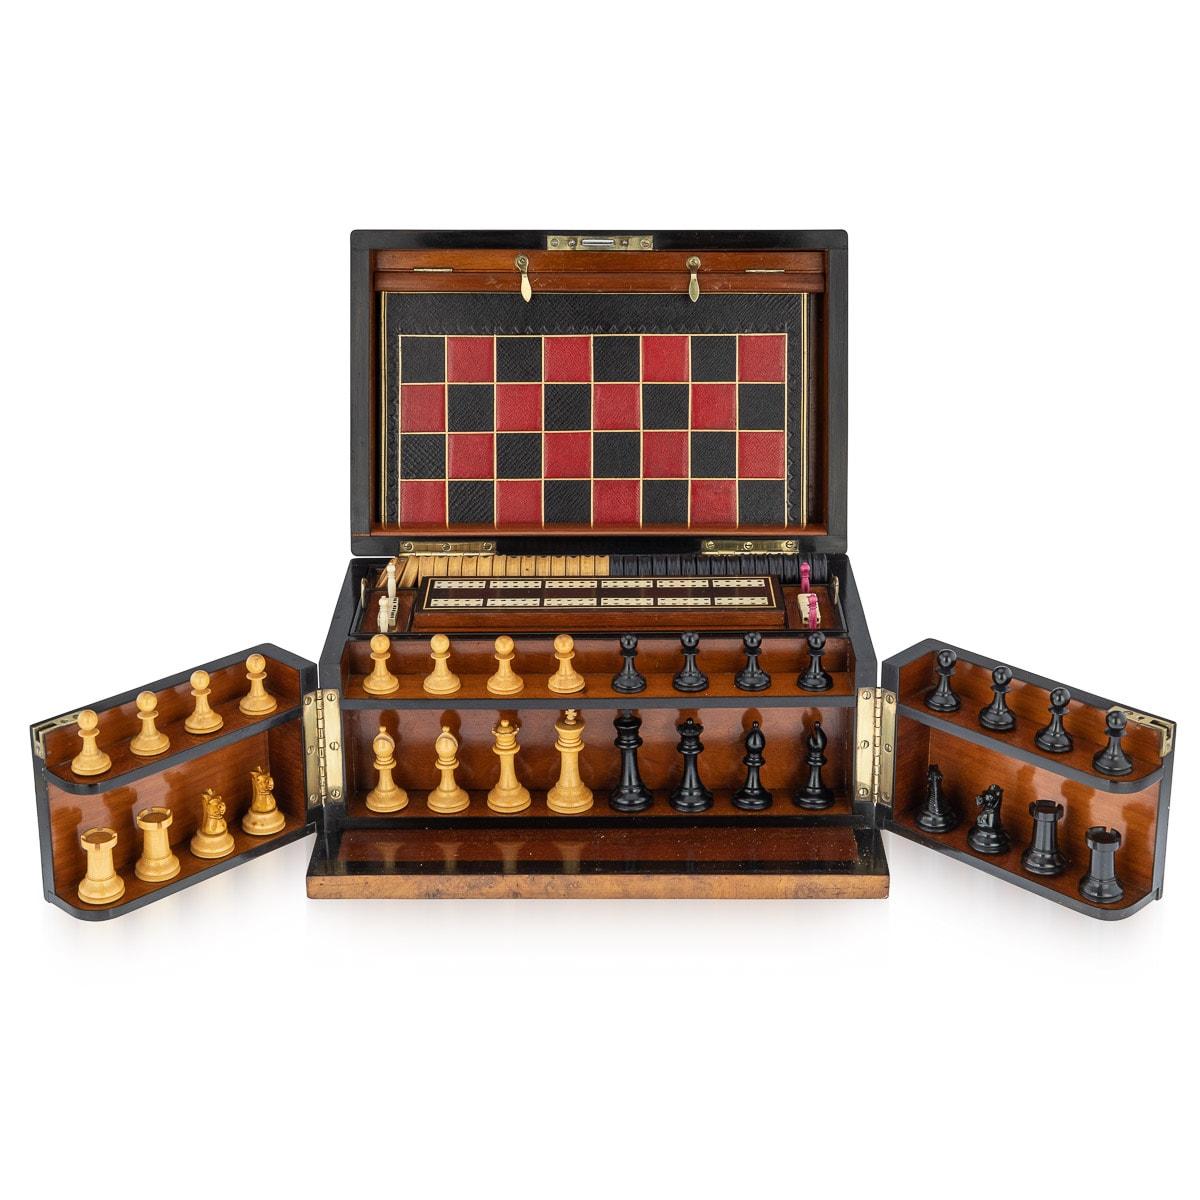 Antique late-19th century Victorian walnut cased games compendium, the interior comprising a chess set, draughts, dominoes, dice, cribbage board with markers, leather bound boards for games, playing cards, droughts counters, a dice Shaker. A superb